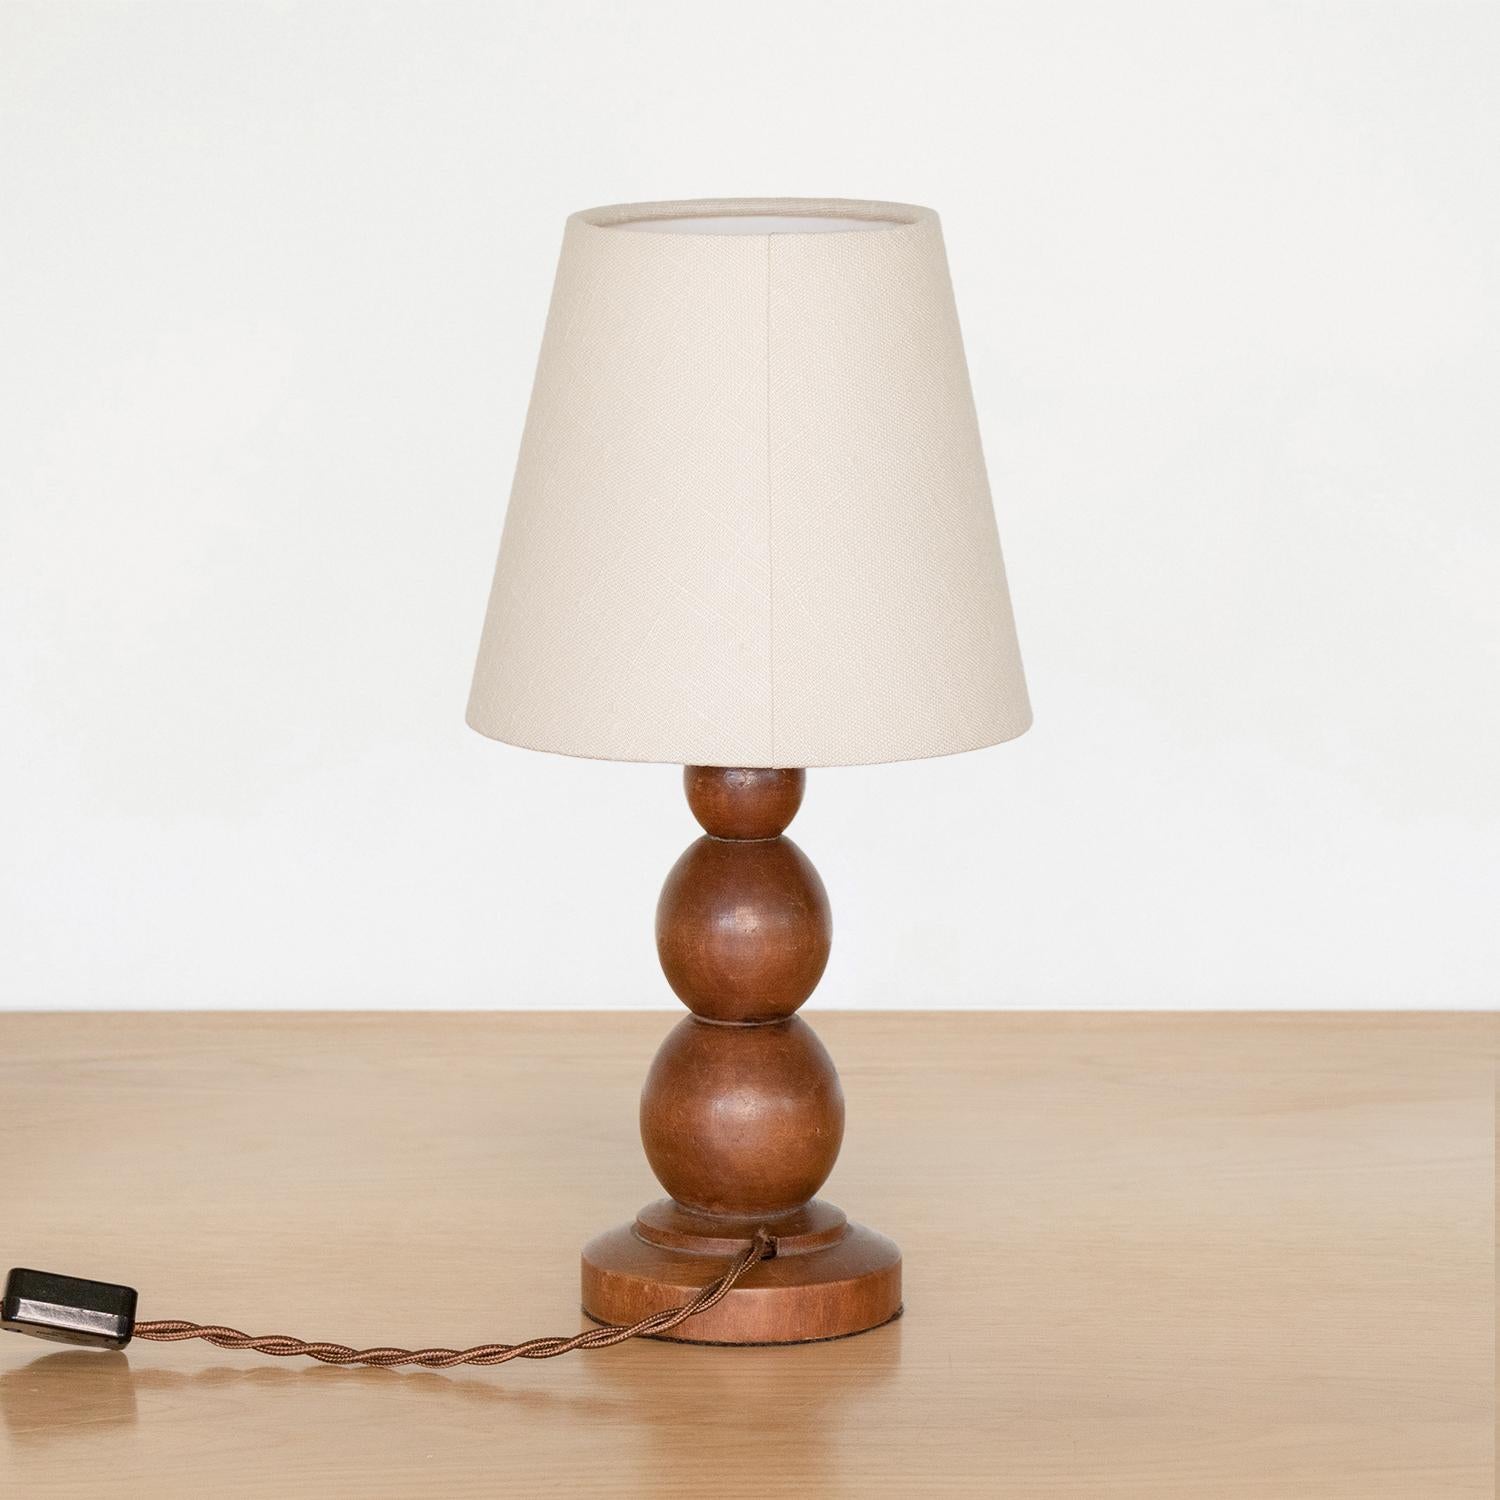 20th Century Petite French Stacked Ball Lamp